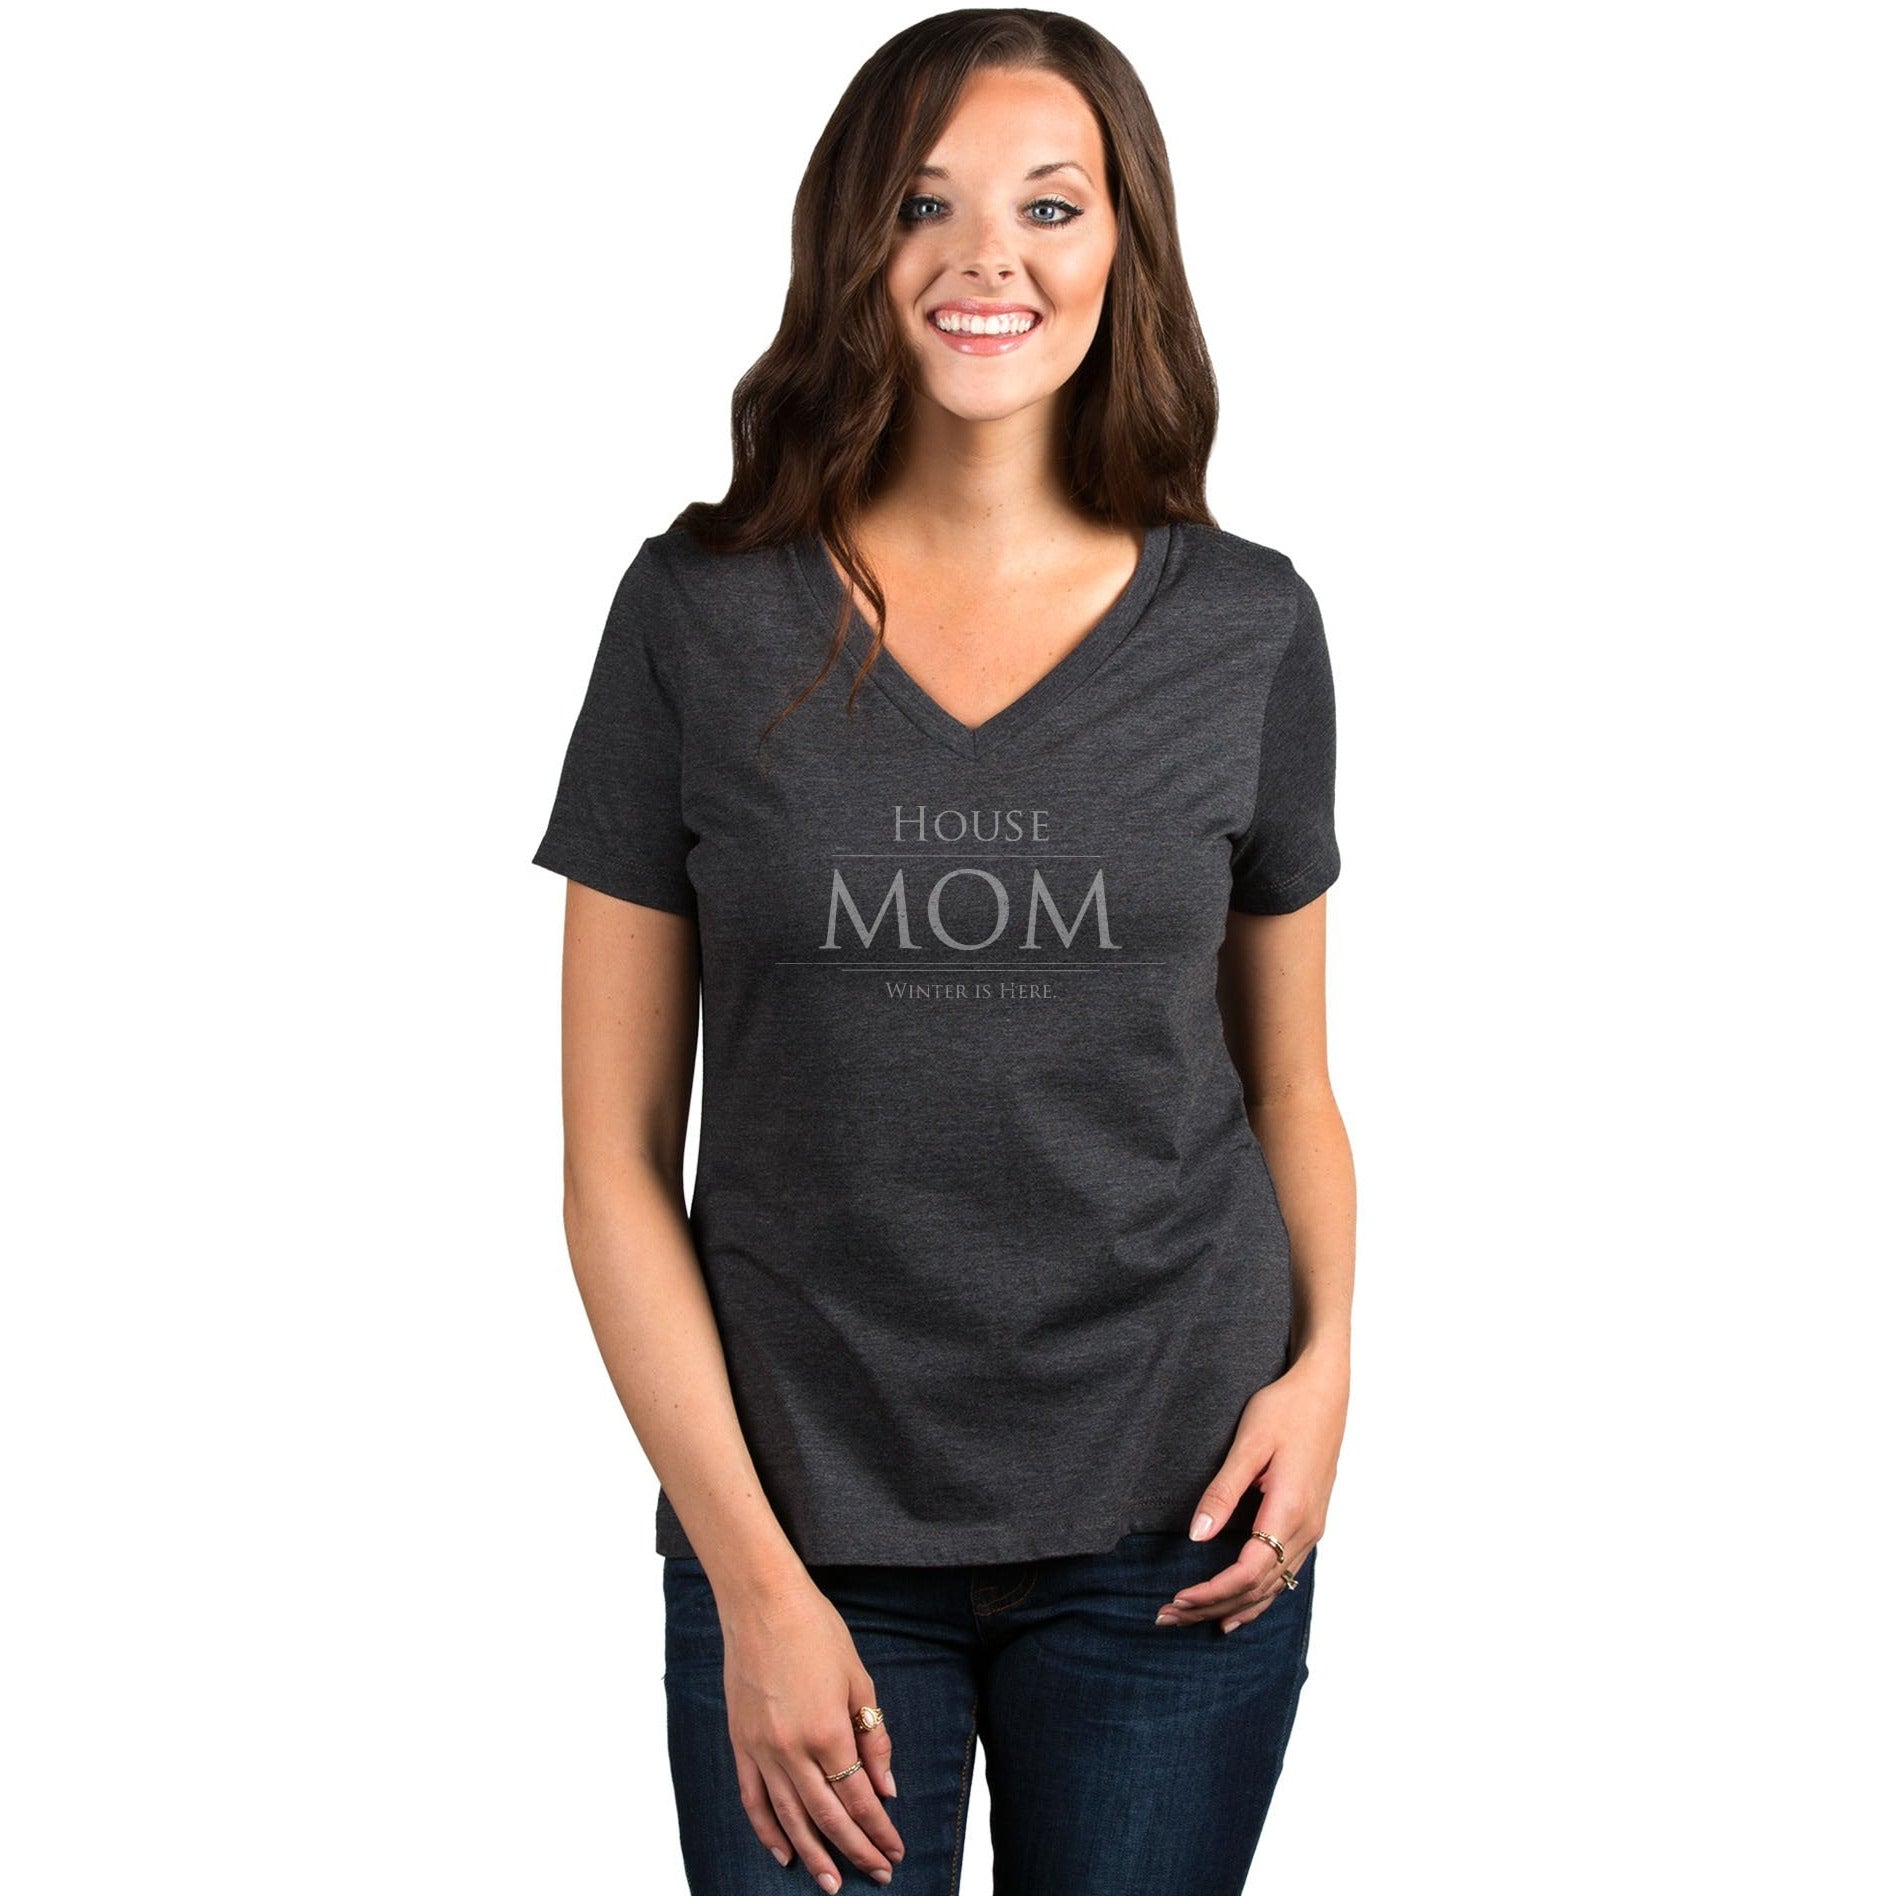 House Mom Winter Is Here Women's Relaxed V-Neck T-Shirt Tee Charcoal Model